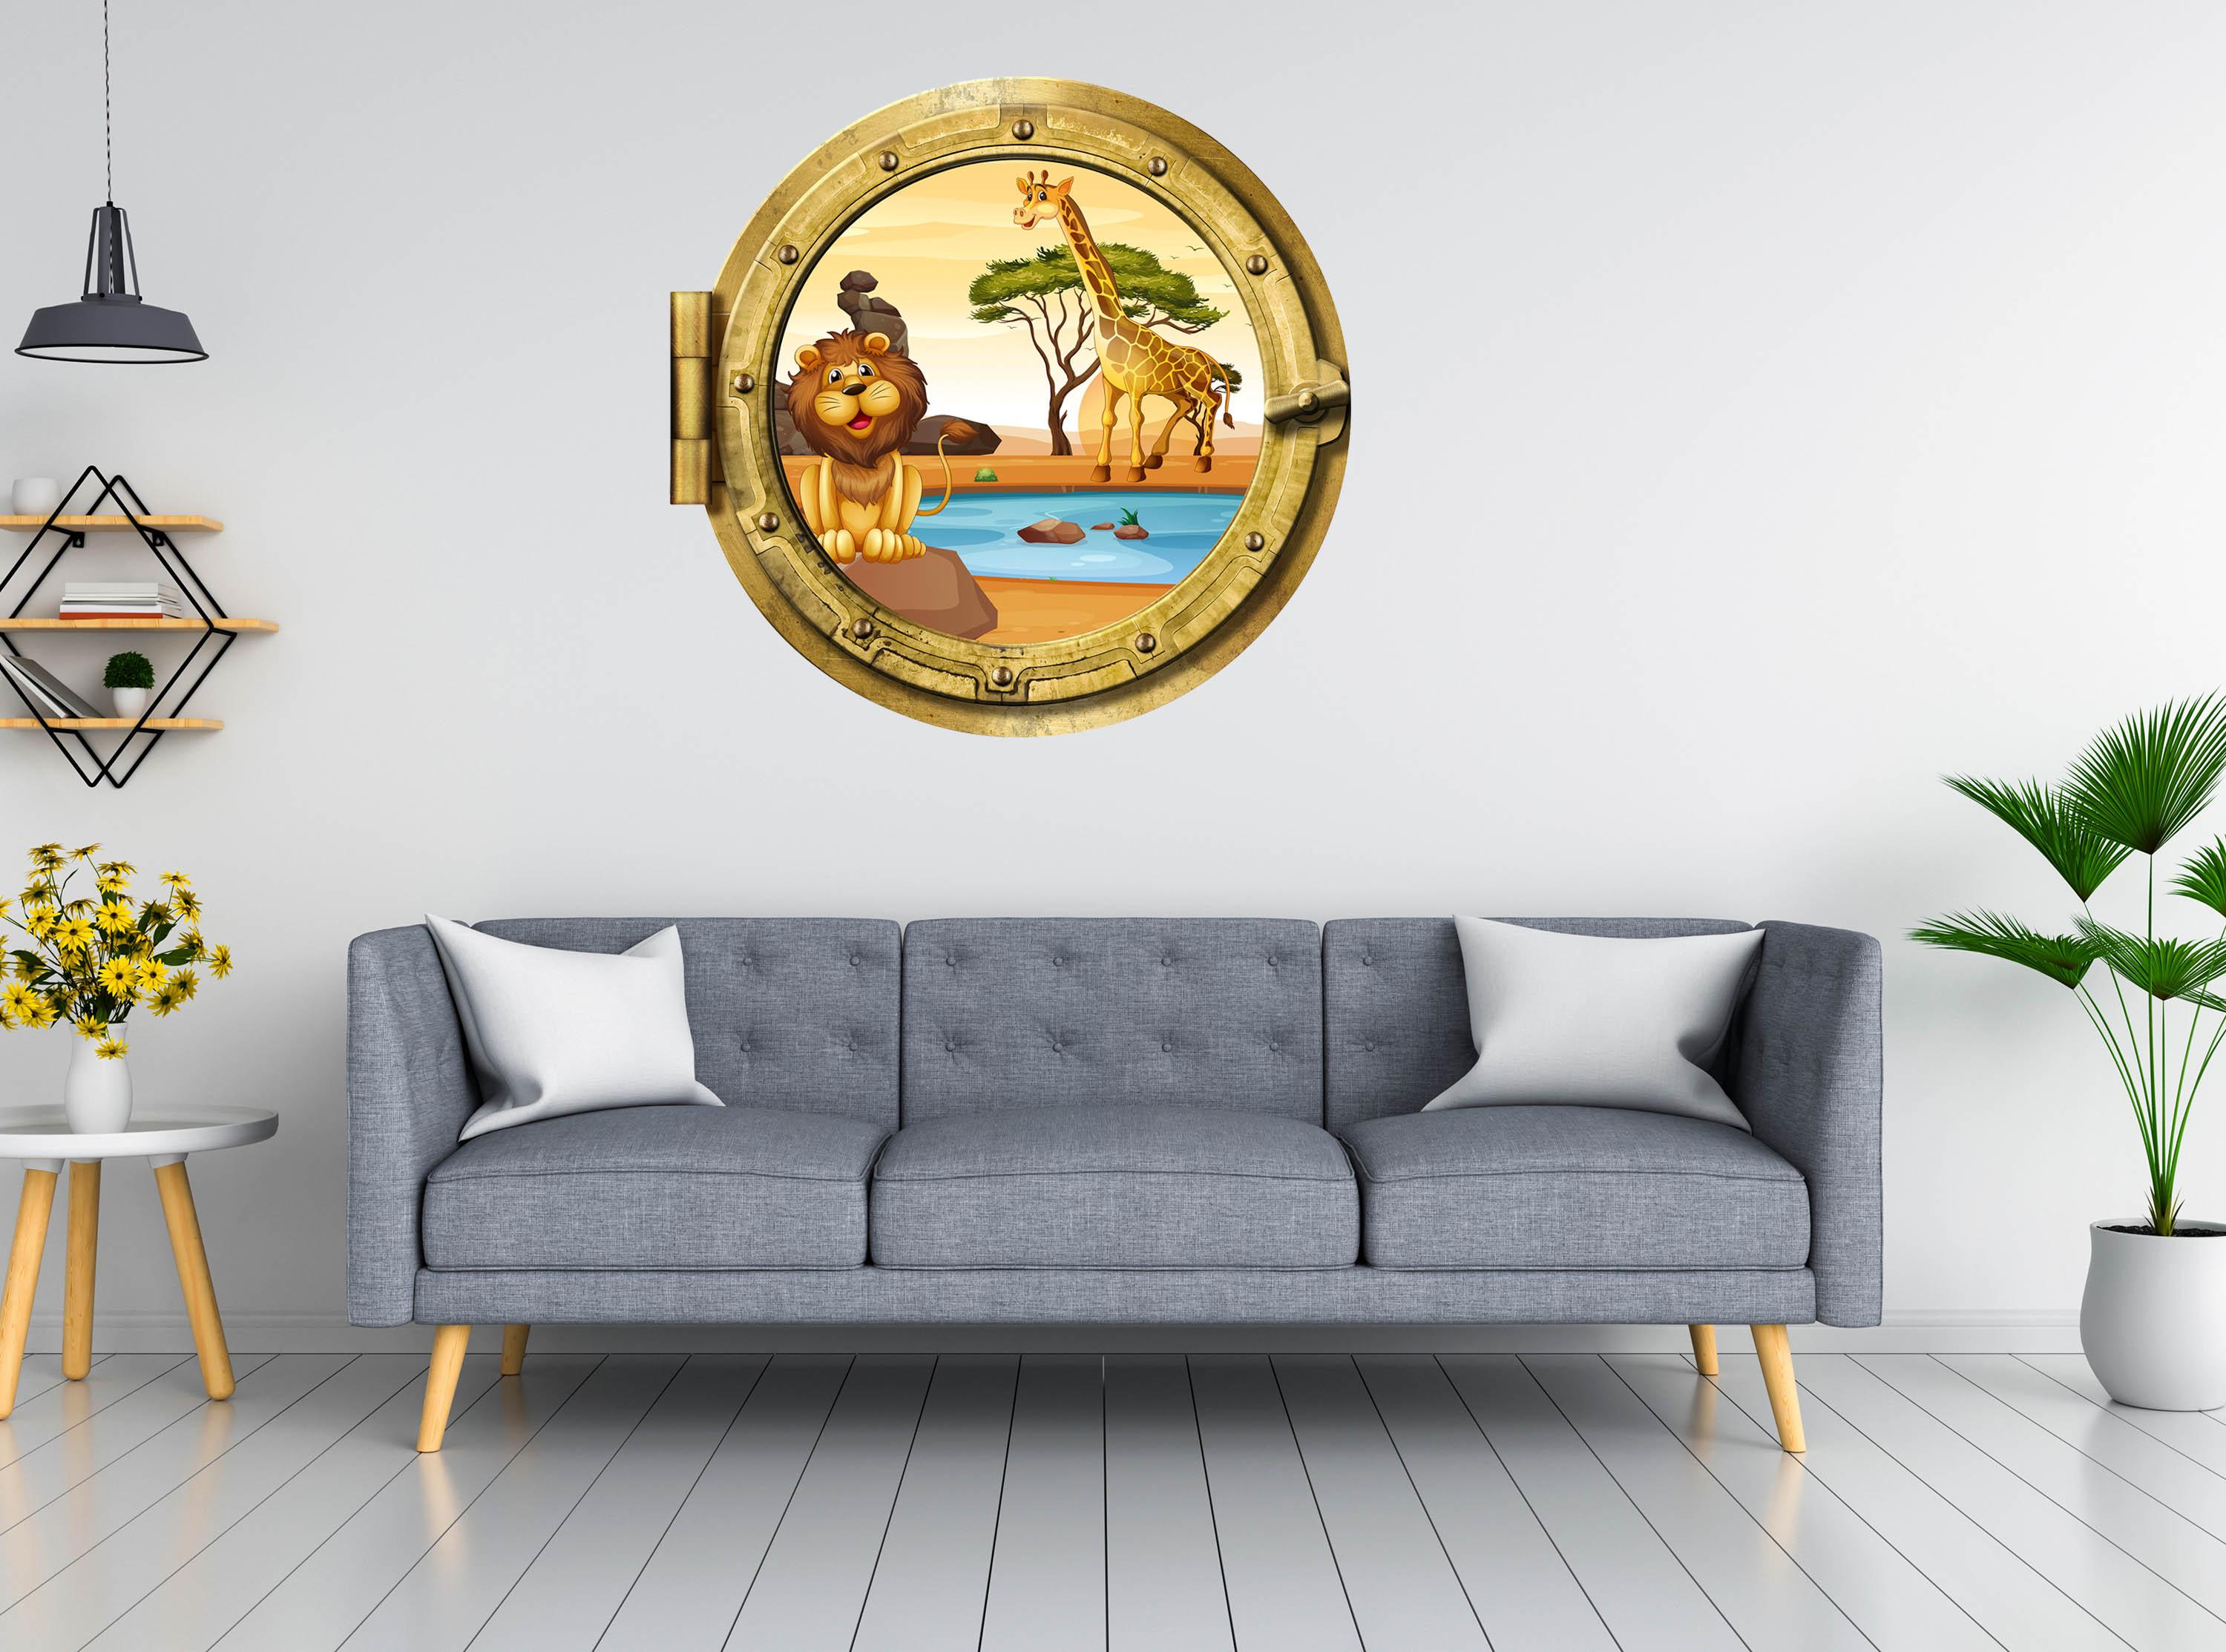 Lion and Giraffe at Waterhole #004, Window Decal, removable Decal